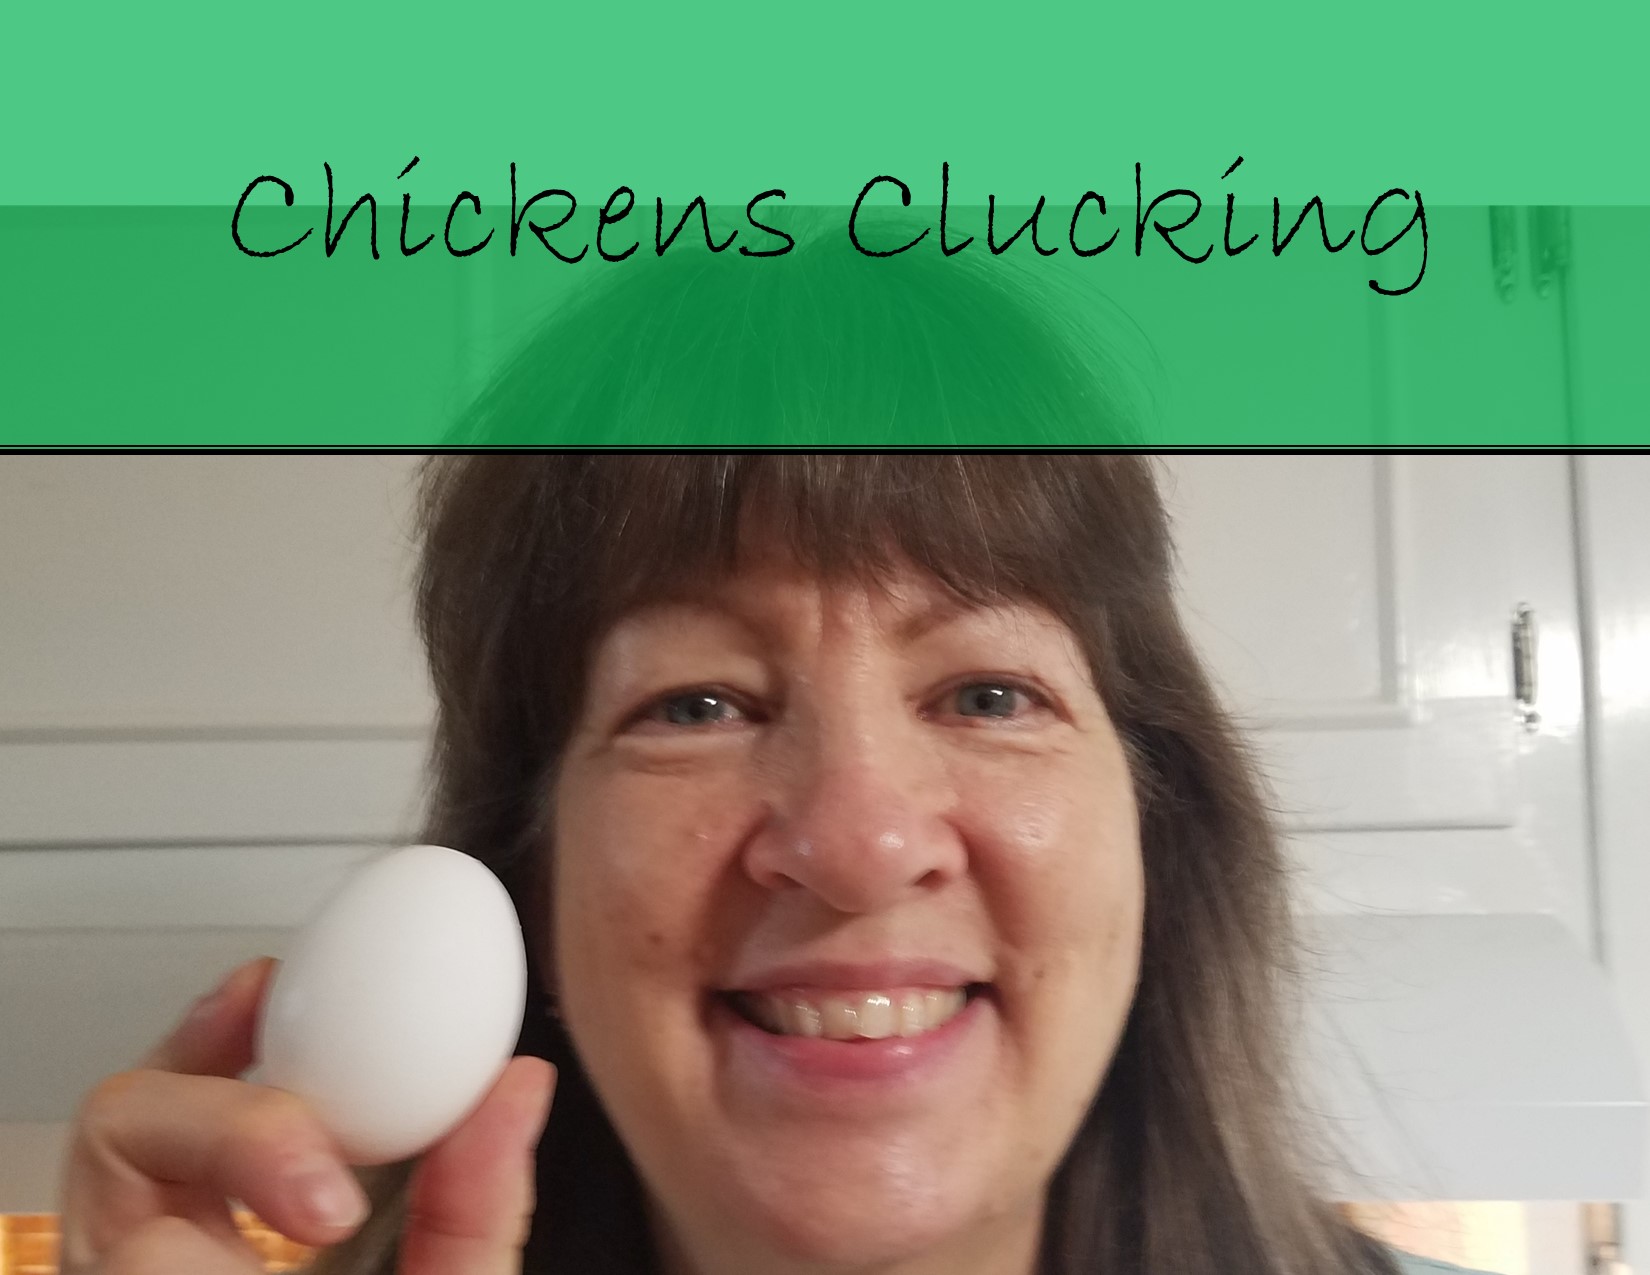 Chickens Clucking (thank you, Deep Purple!)